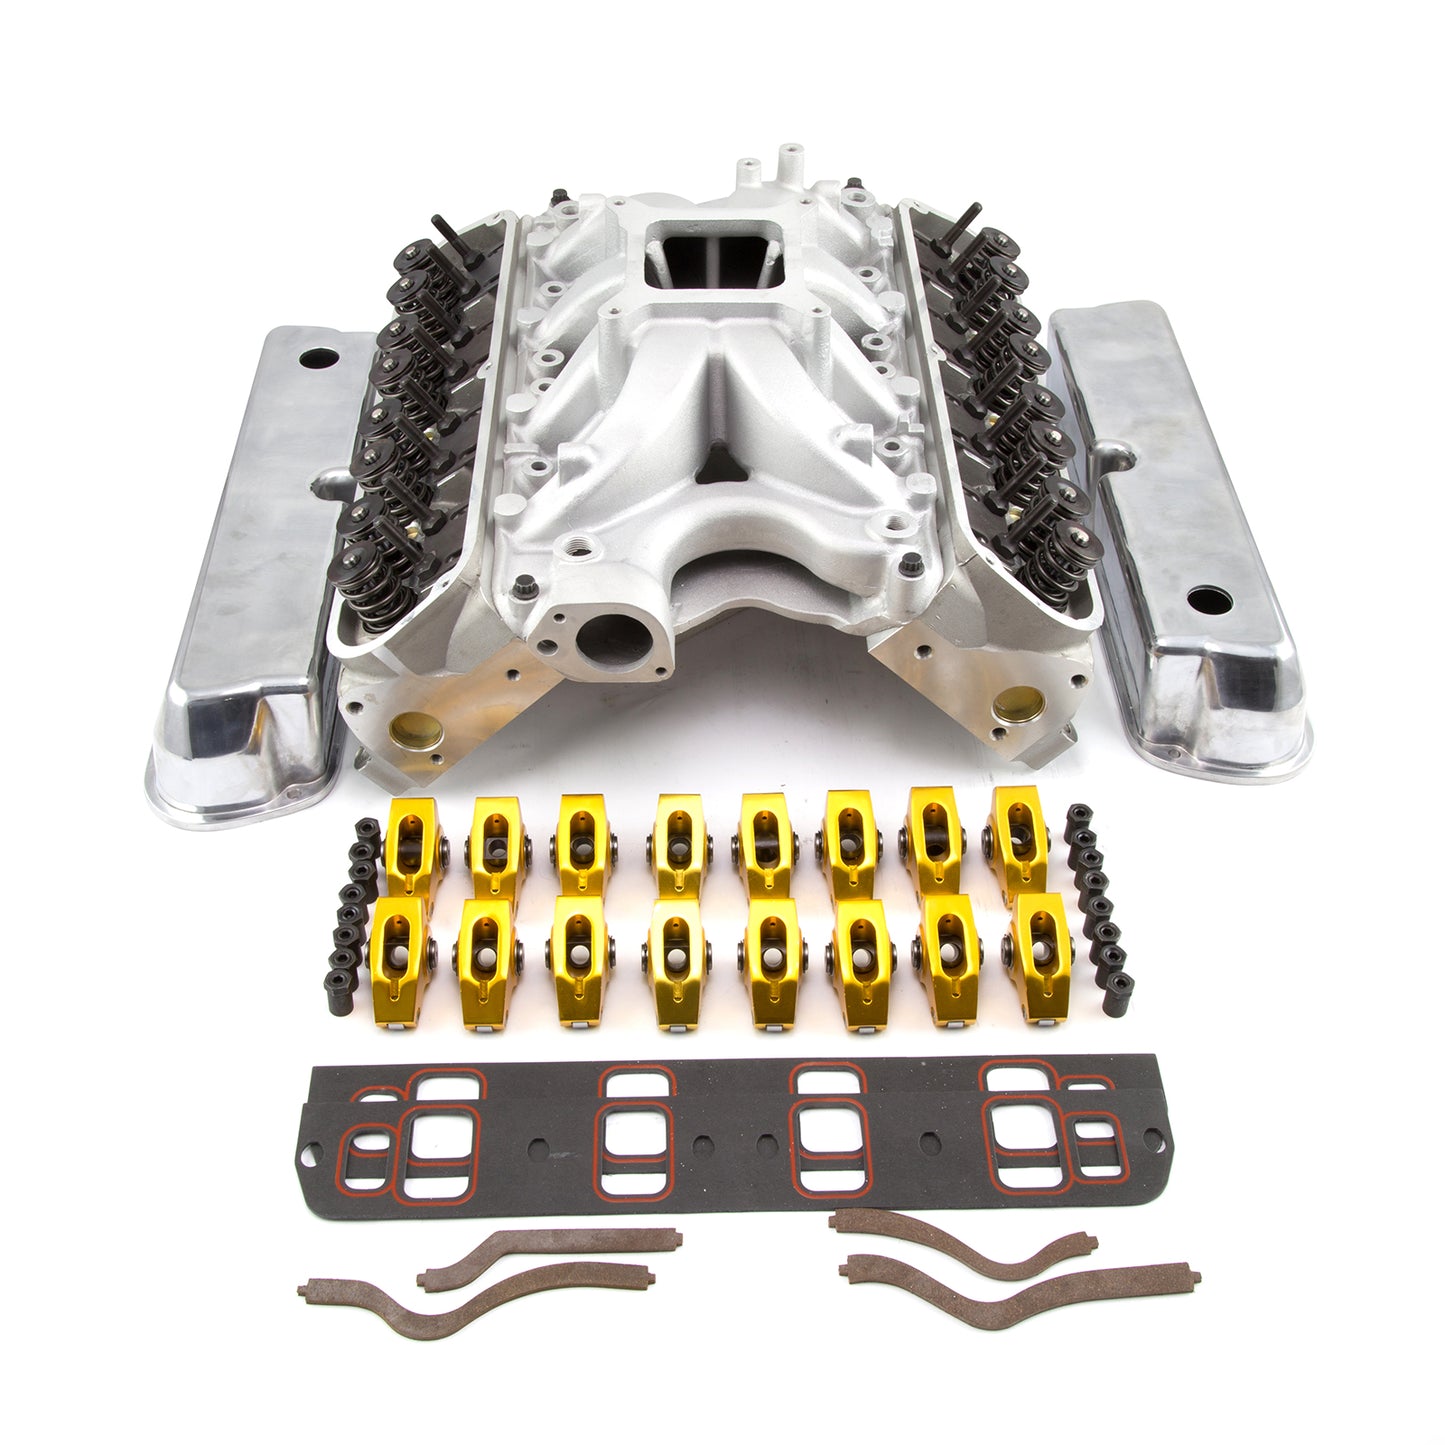 Speedmaster PCE435.1032 Fits Ford 351W Windsor Solid FT 190cc Cylinder Head Top End Engine Combo Kit